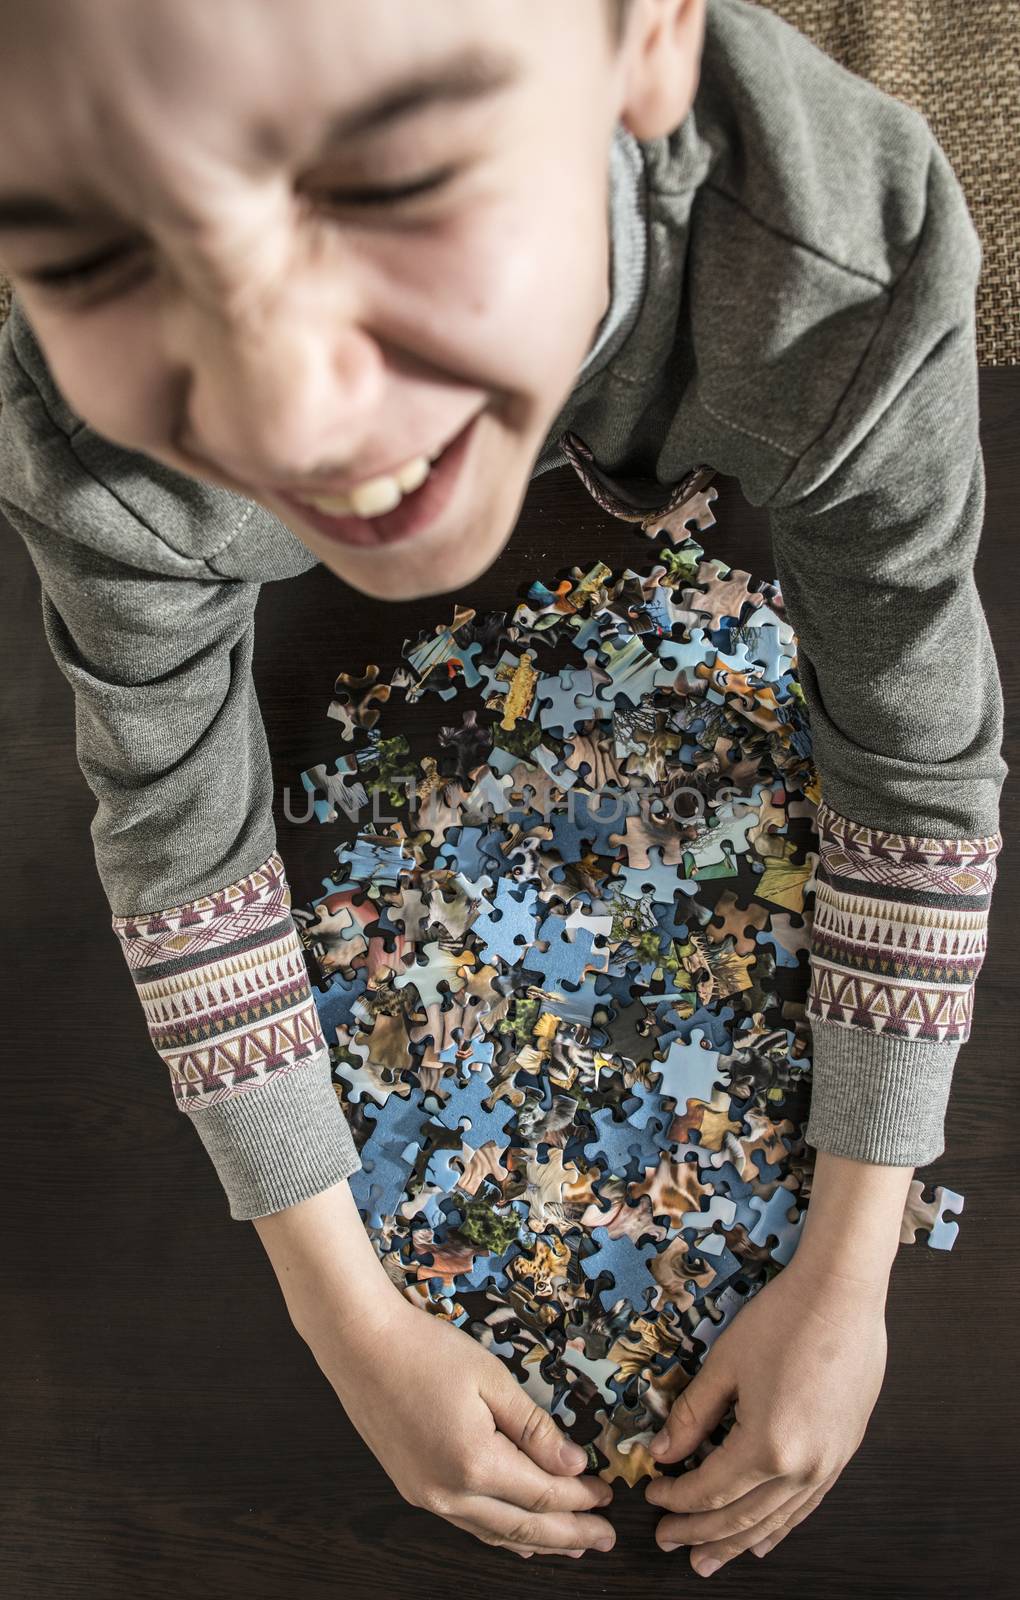 Child and puzzle. 